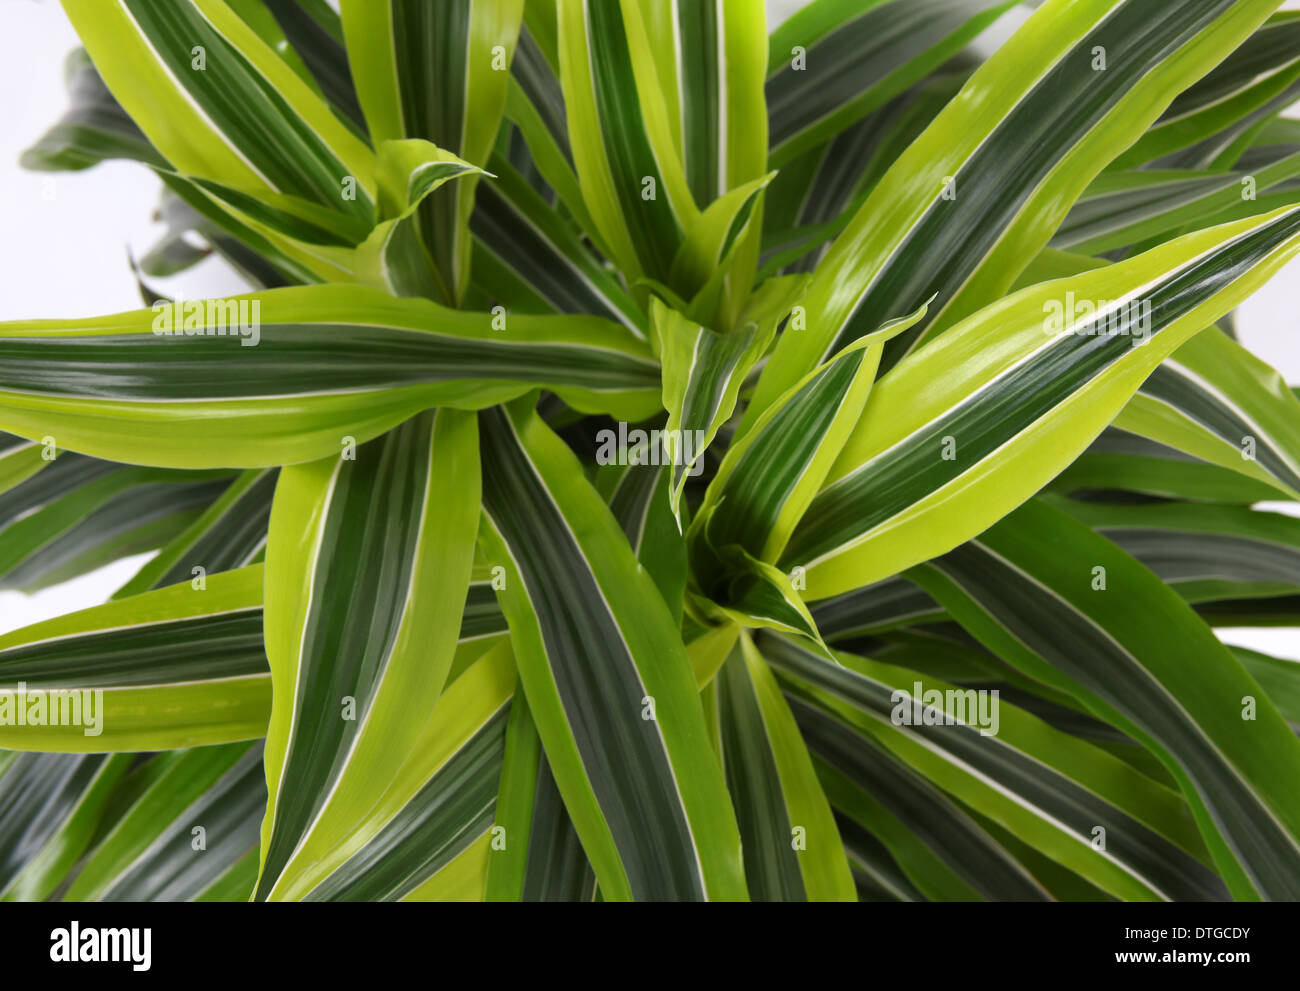 Chlorophytum - evergreen perennial flowering plants in the family Asparagaceae. Stock Photo